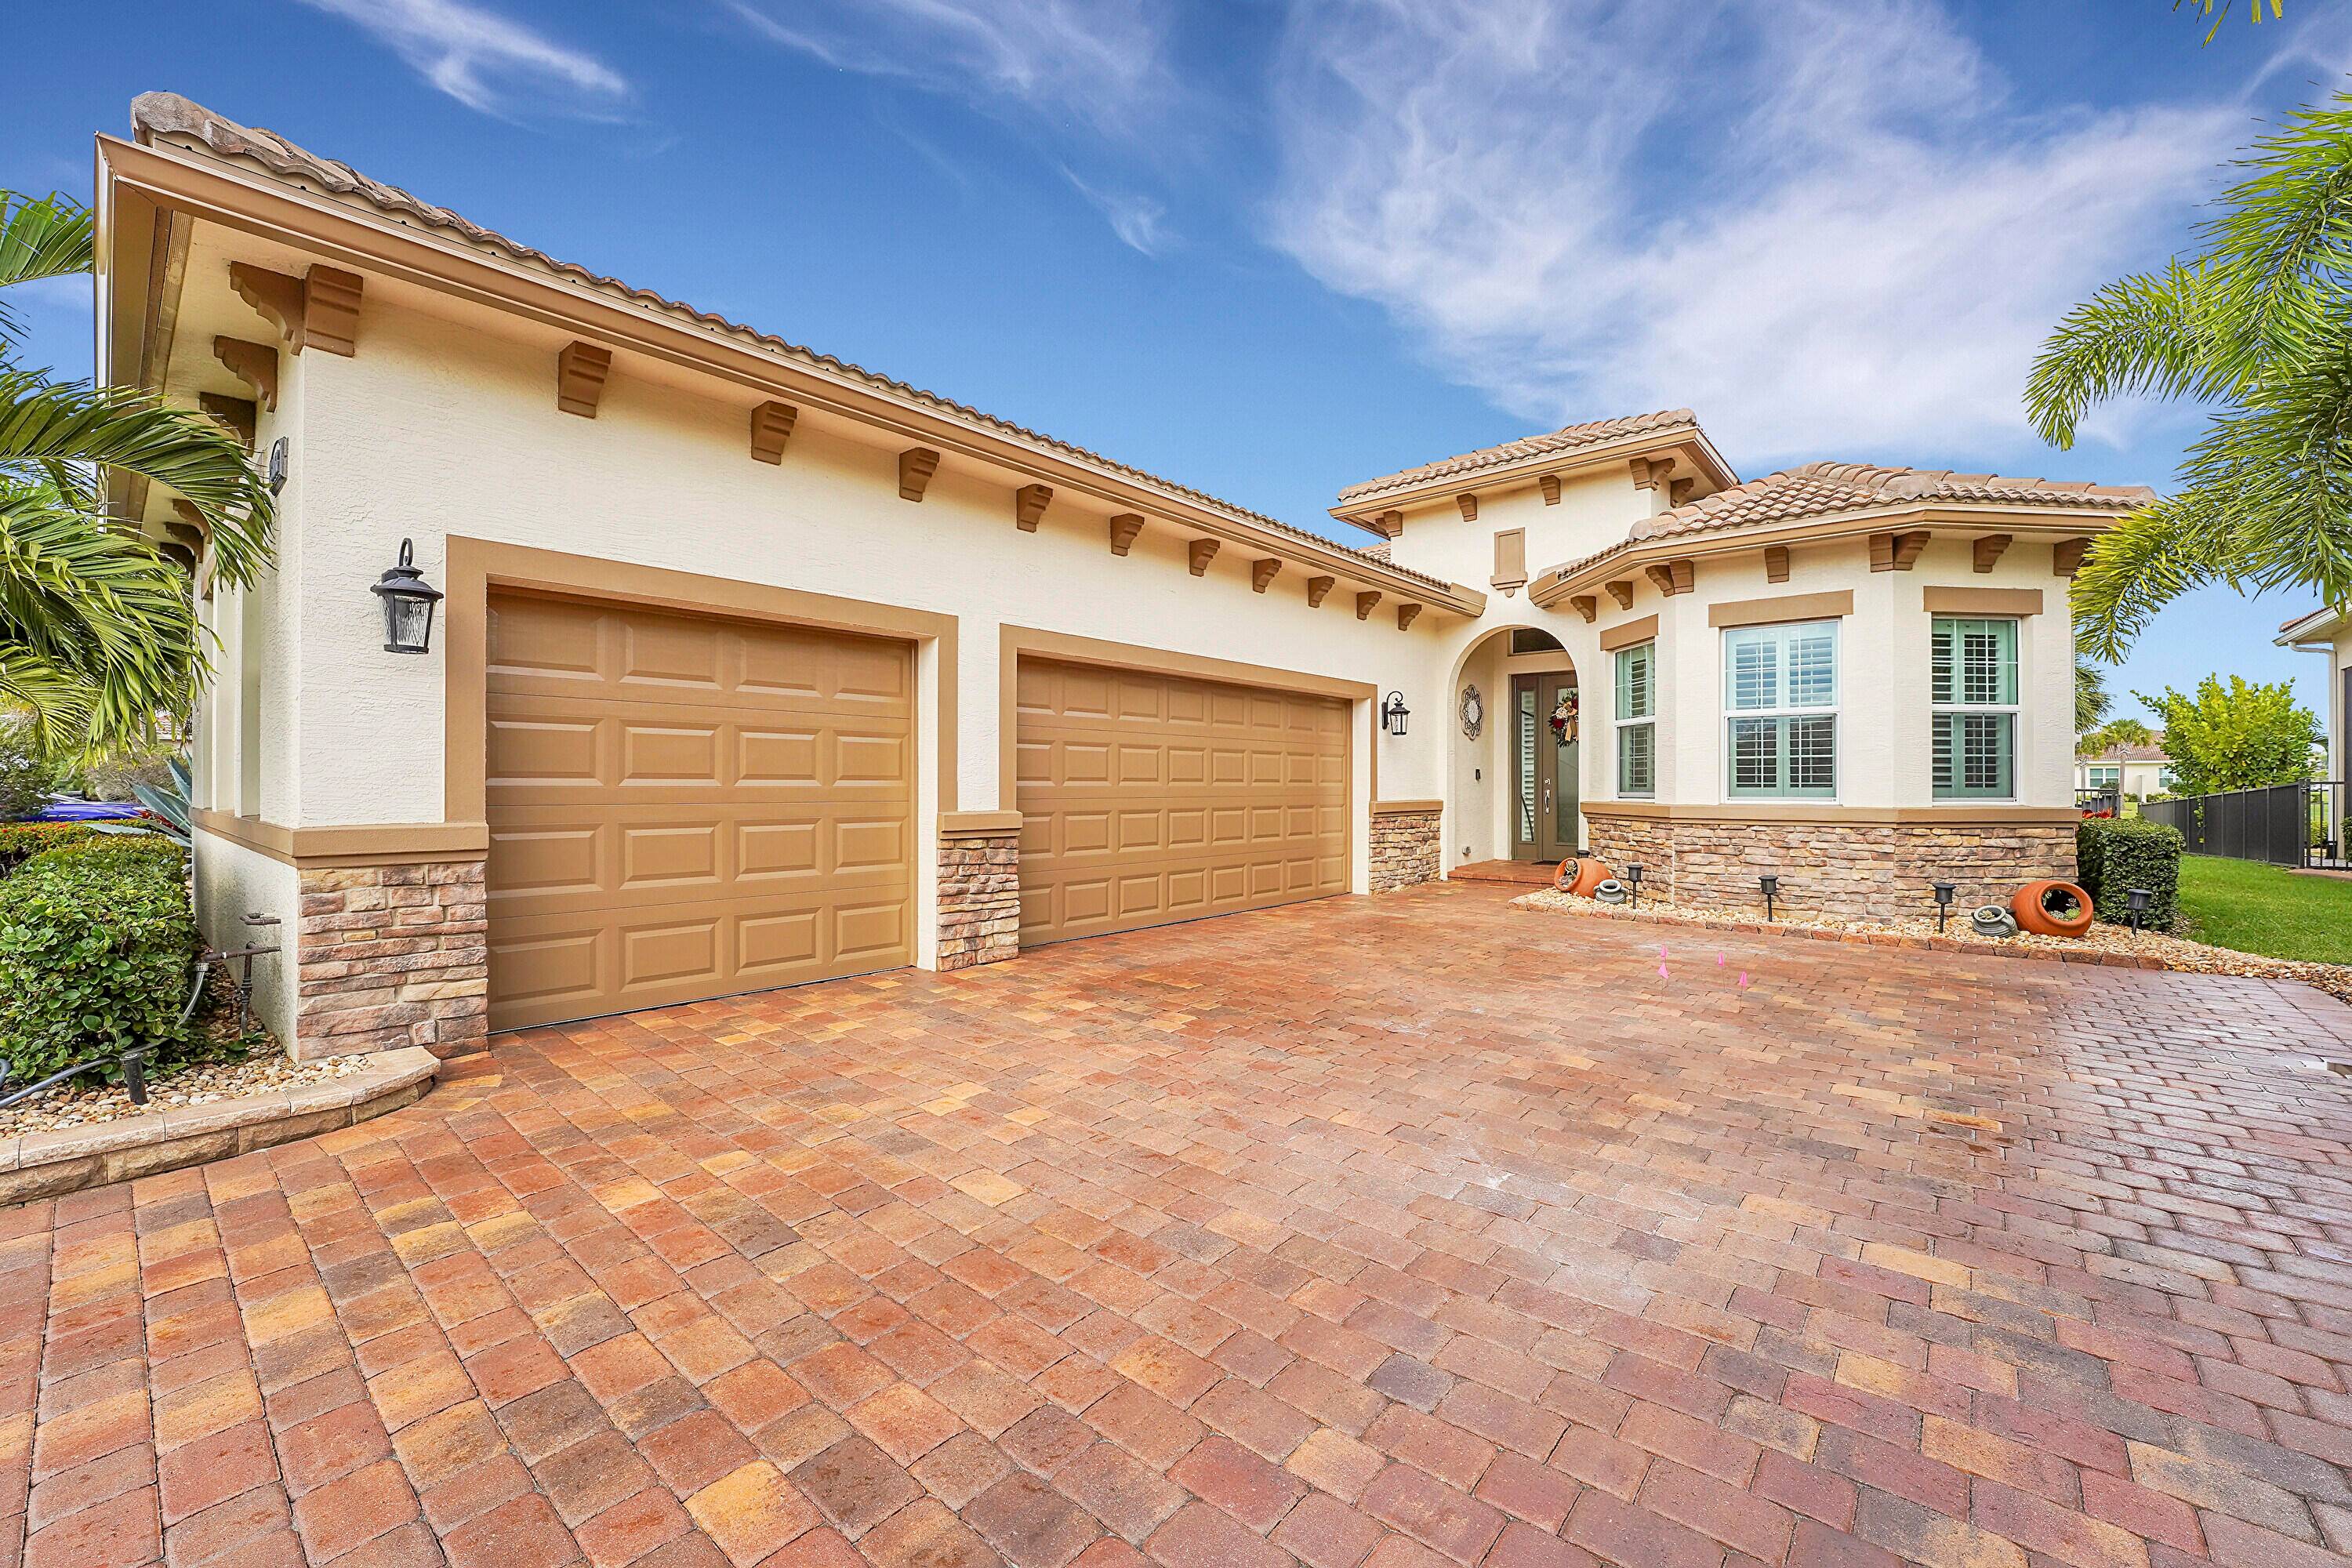 Welcome to PGA Village Verano, where the Isabella Floorplan Home redefines luxury living.